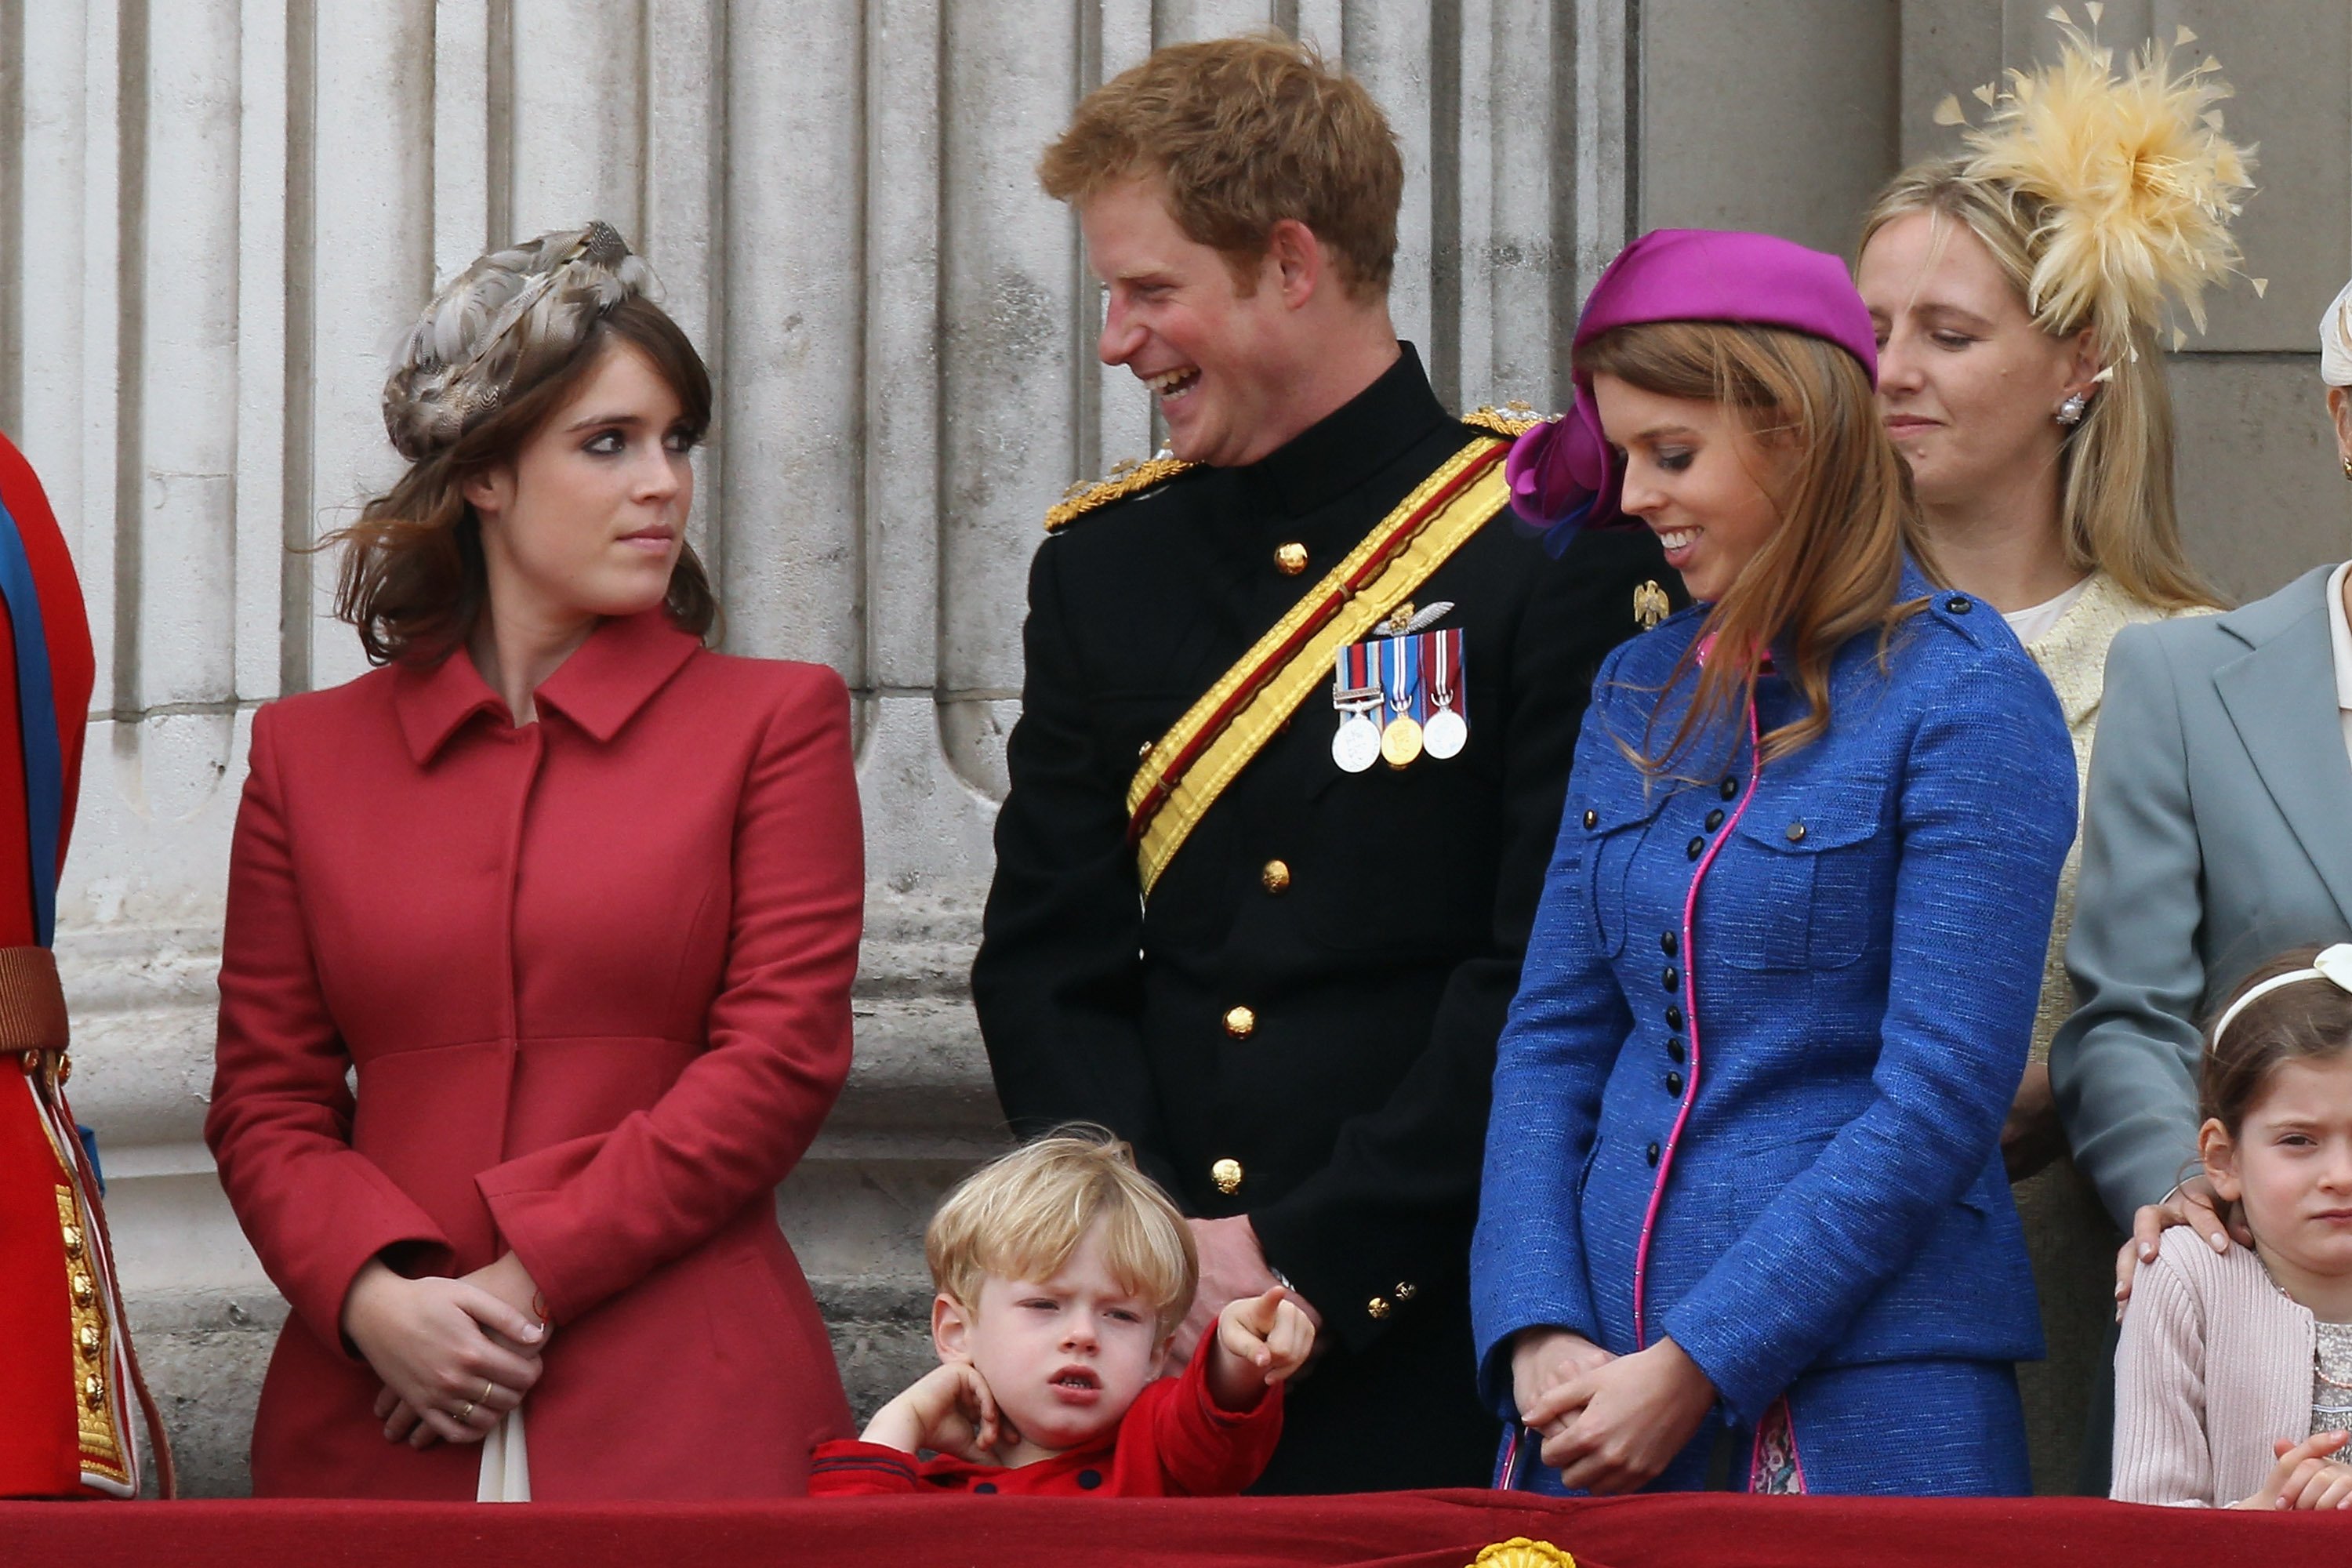 Princess Eugenie, Prince Harry, and Princess Beatrice on the balcony of Buckingham Palace after the Trooping the Colour ceremony on June 16, 2012, in London, England. | Source: Dan Kitwood/Getty Images